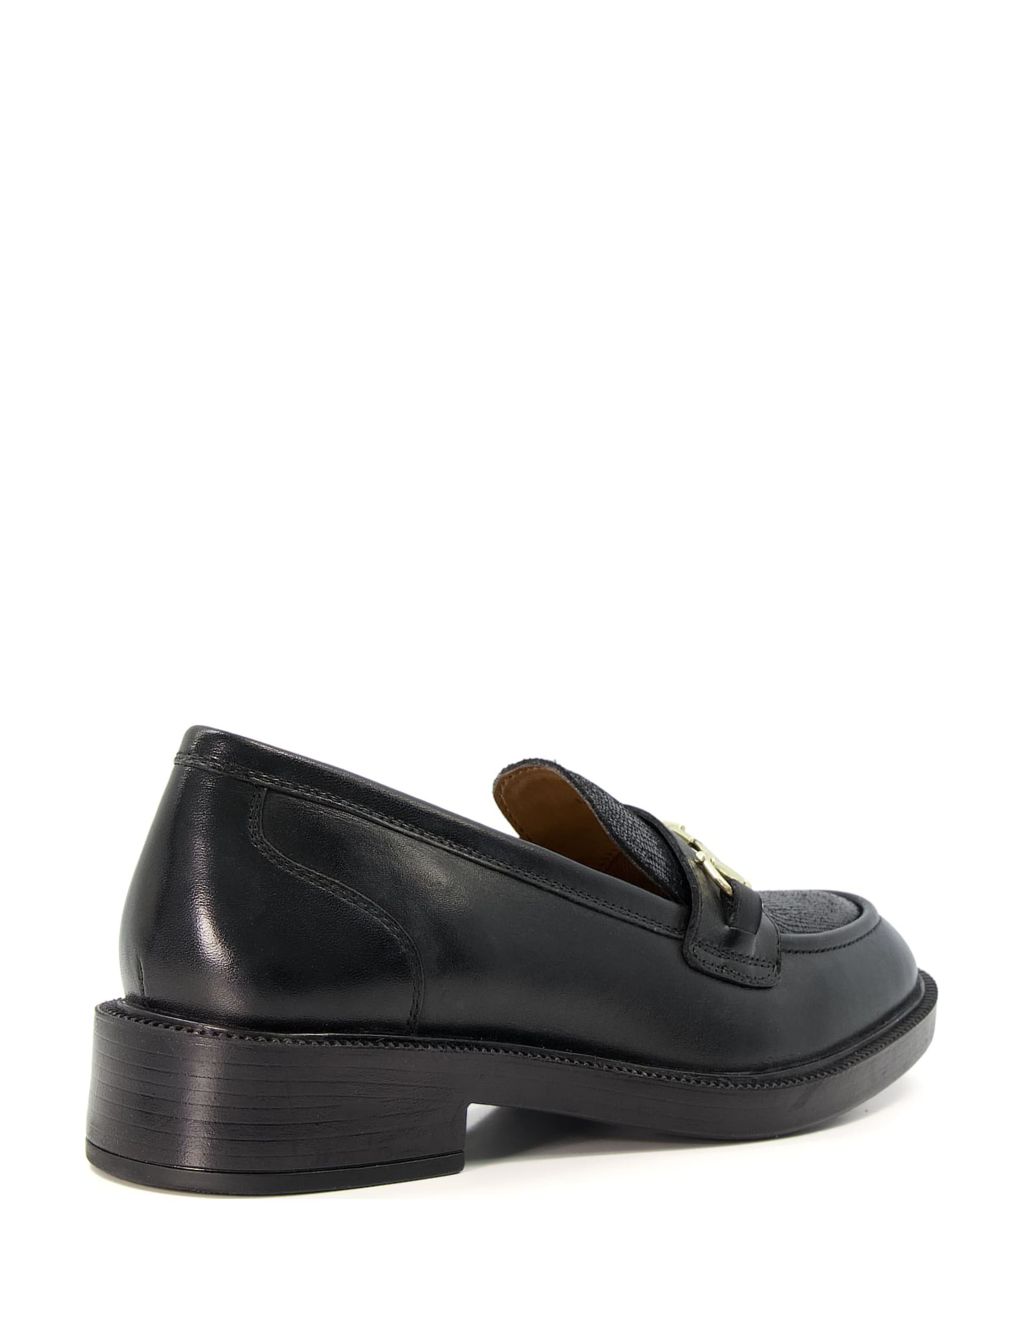 Leather Bar Trim Flat Loafers image 4